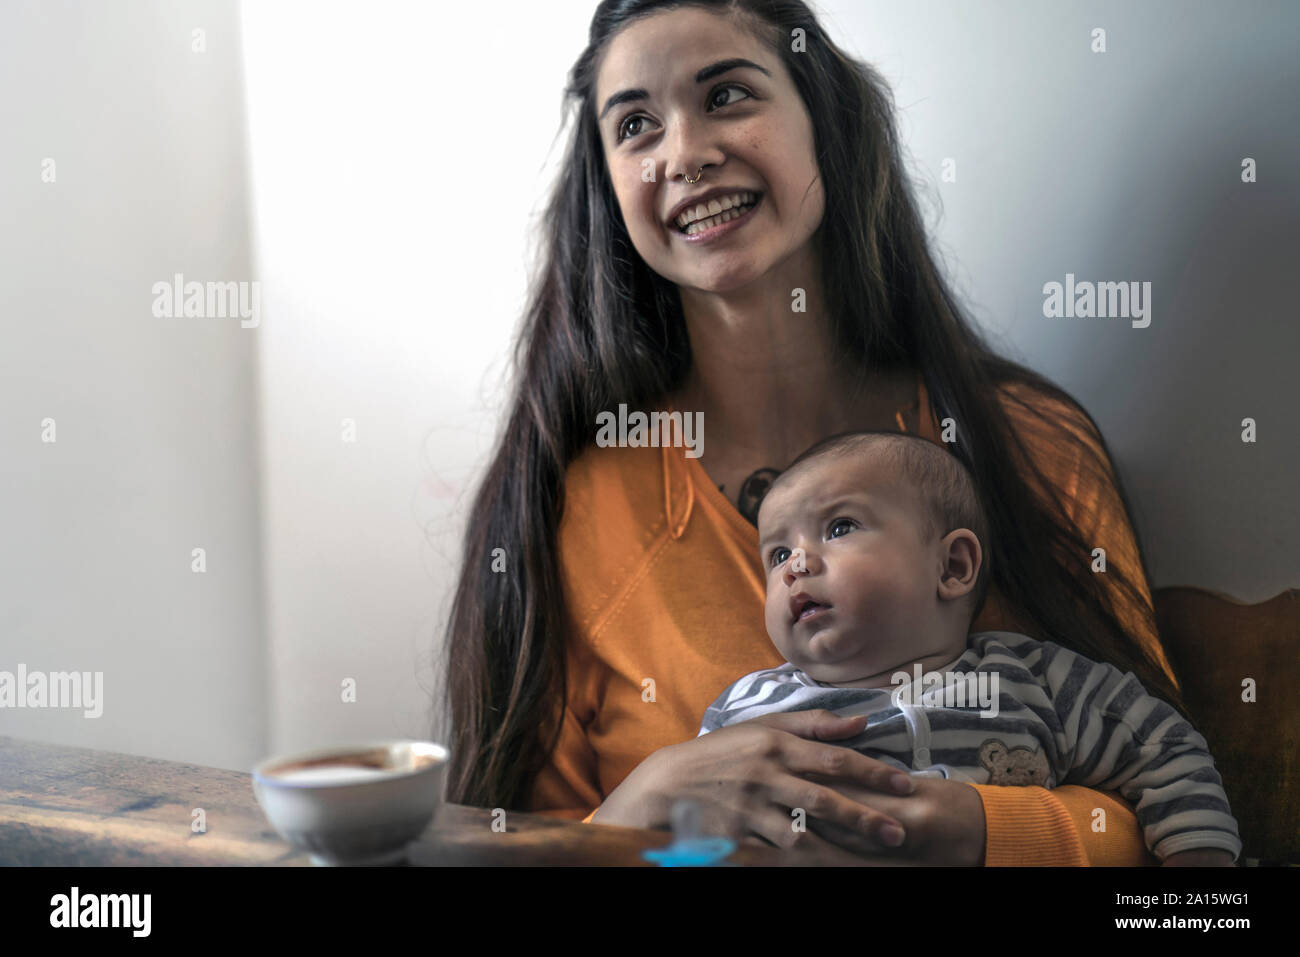 Happy mother with baby sitting at wooden table at home Stock Photo